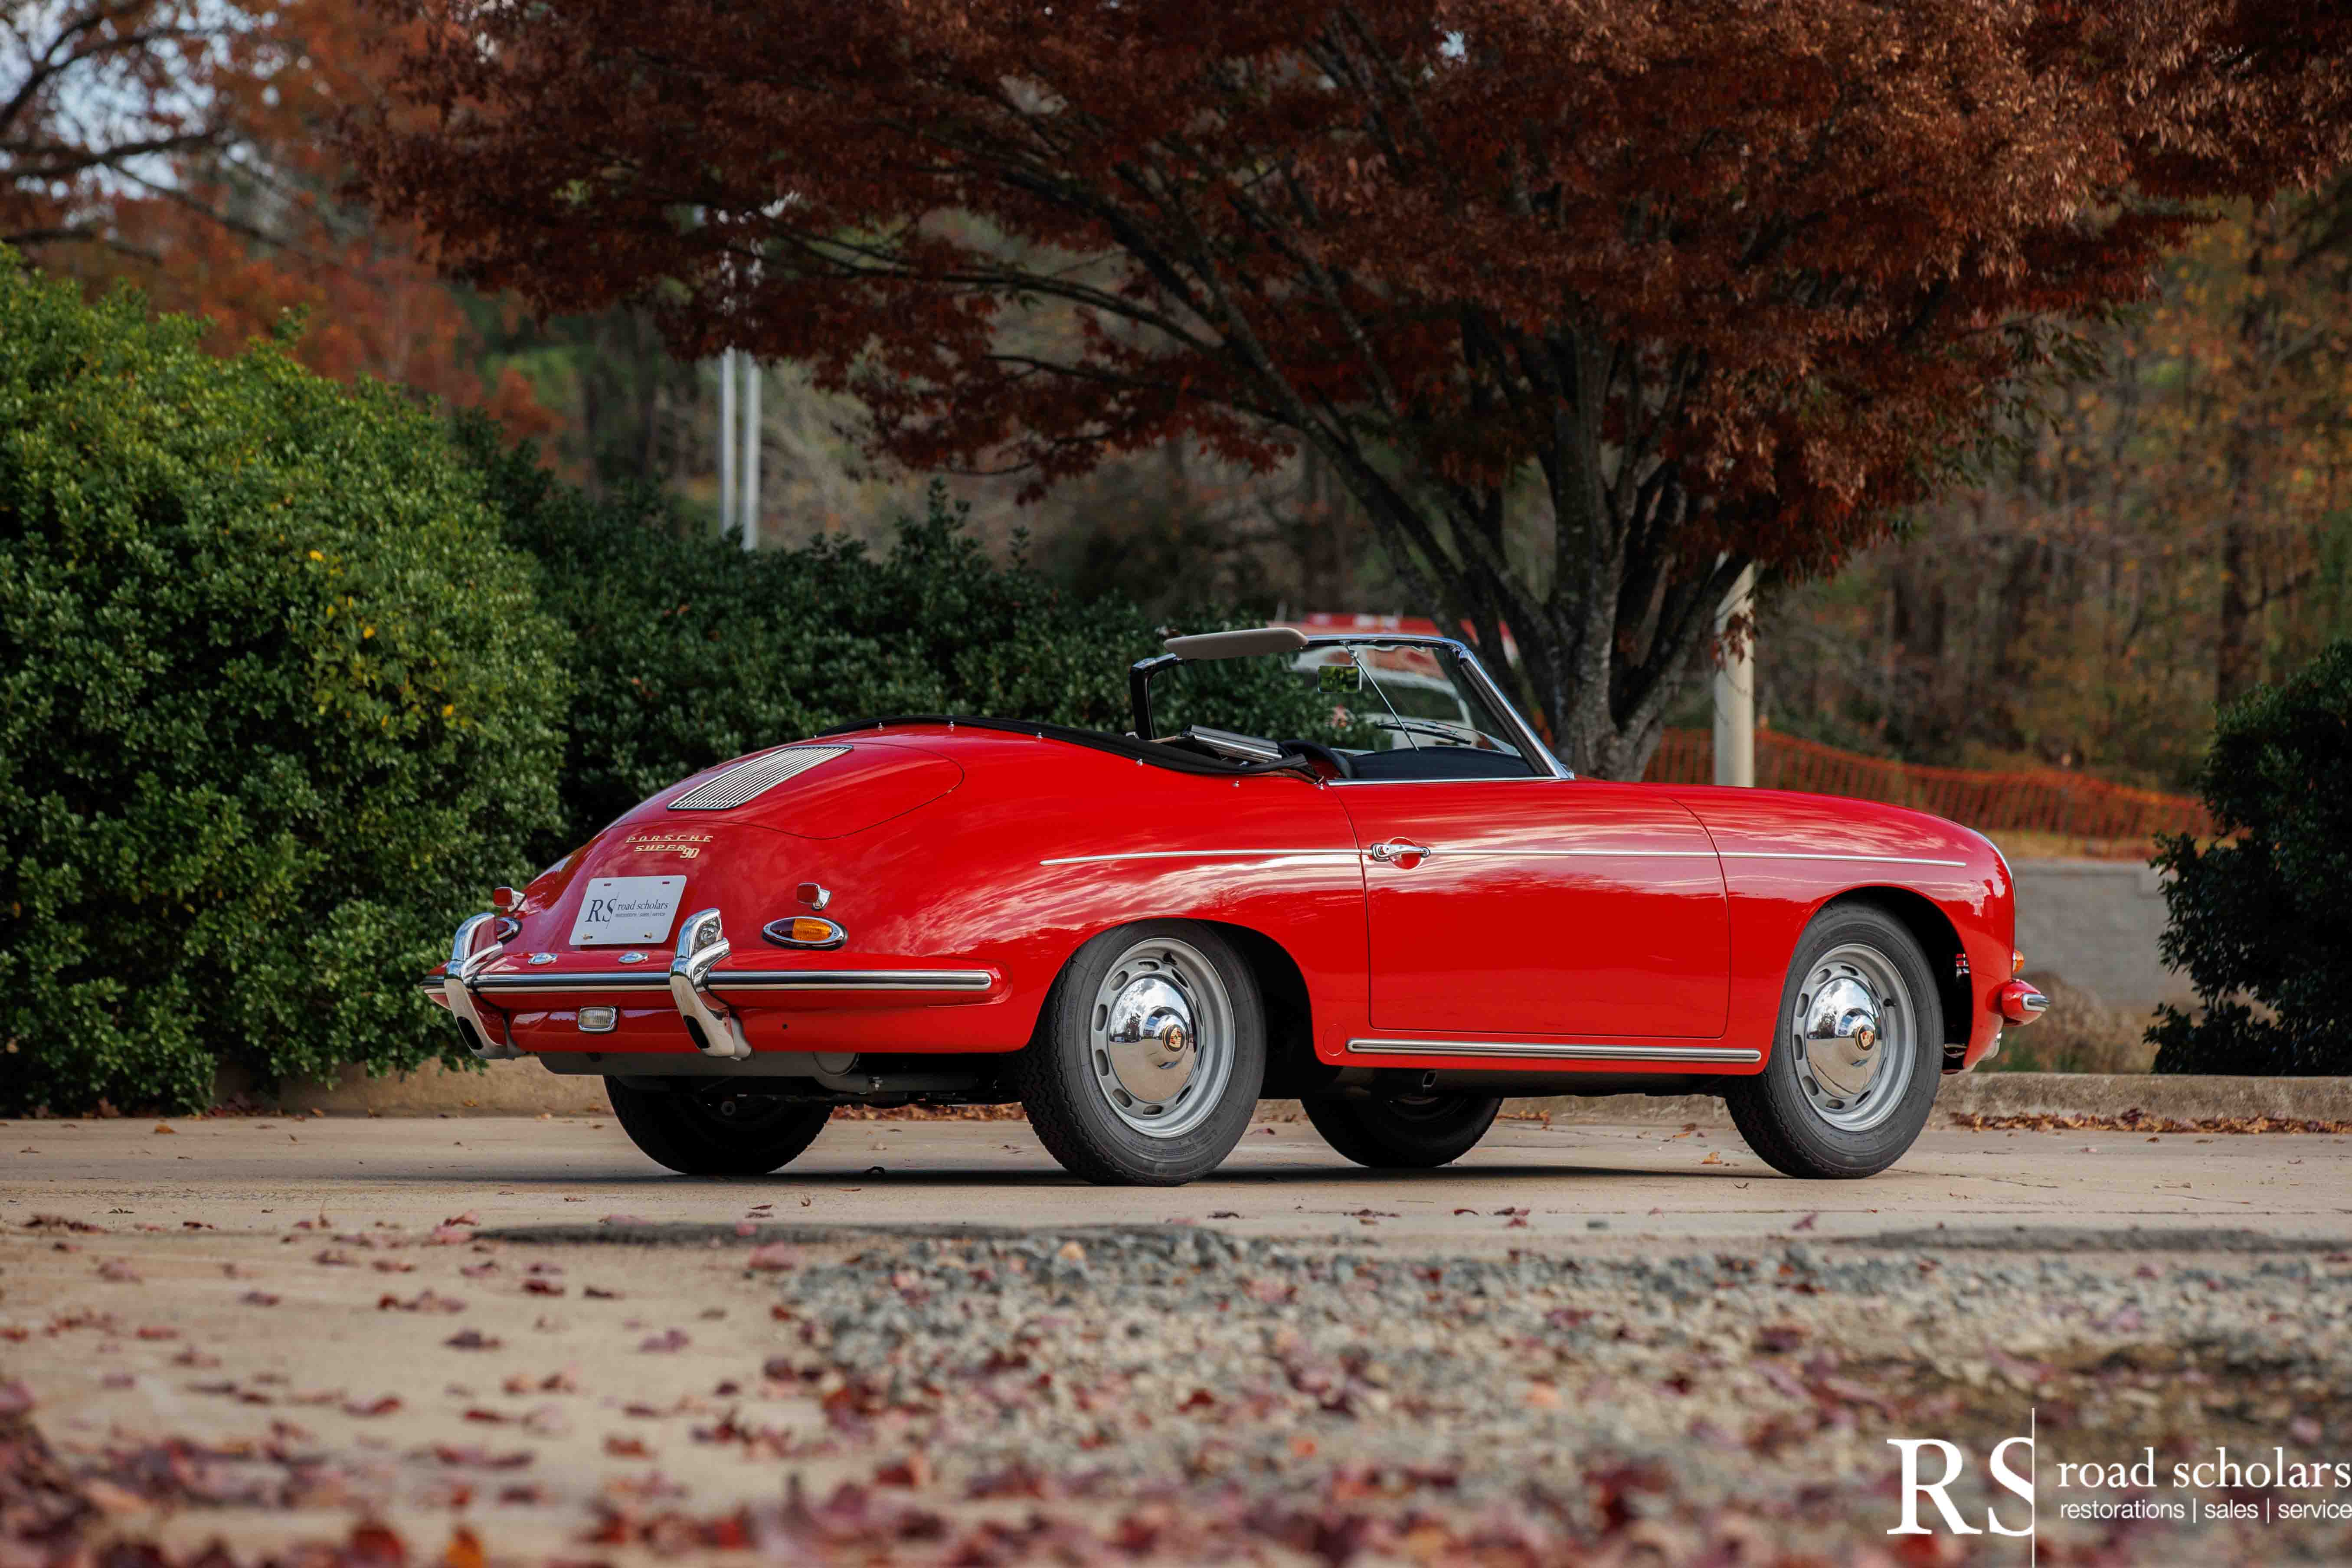 1961 Porsche 356B Super 90 (T5) Roadster chassis 89305 (watermarked)-40